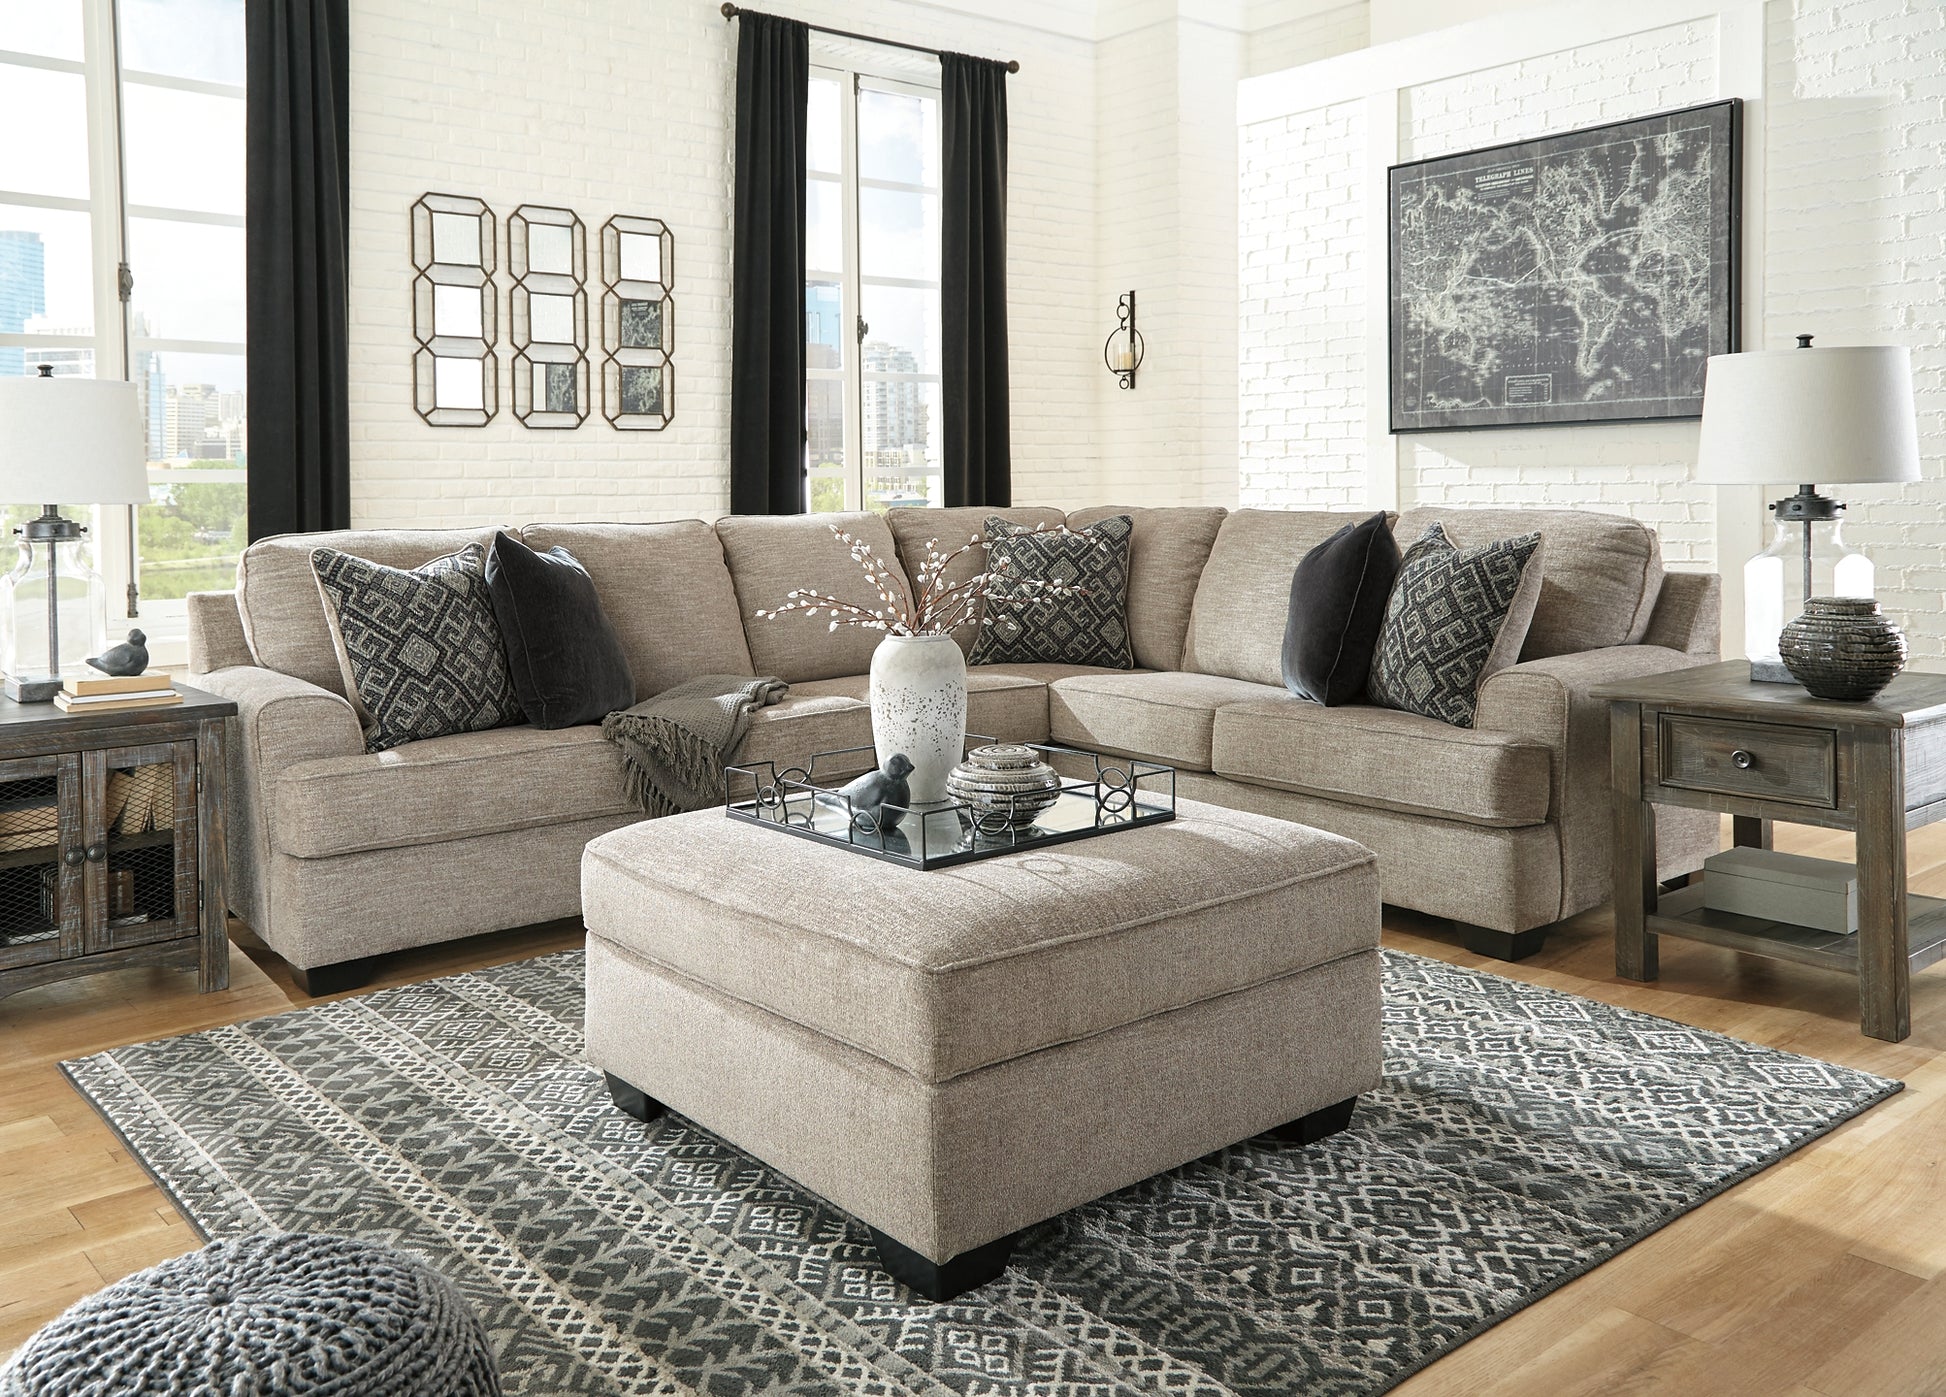 Bovarian 3-Piece Sectional with Ottoman Wilson Furniture (OH)  in Bridgeport, Ohio. Serving Bridgeport, Yorkville, Bellaire, & Avondale